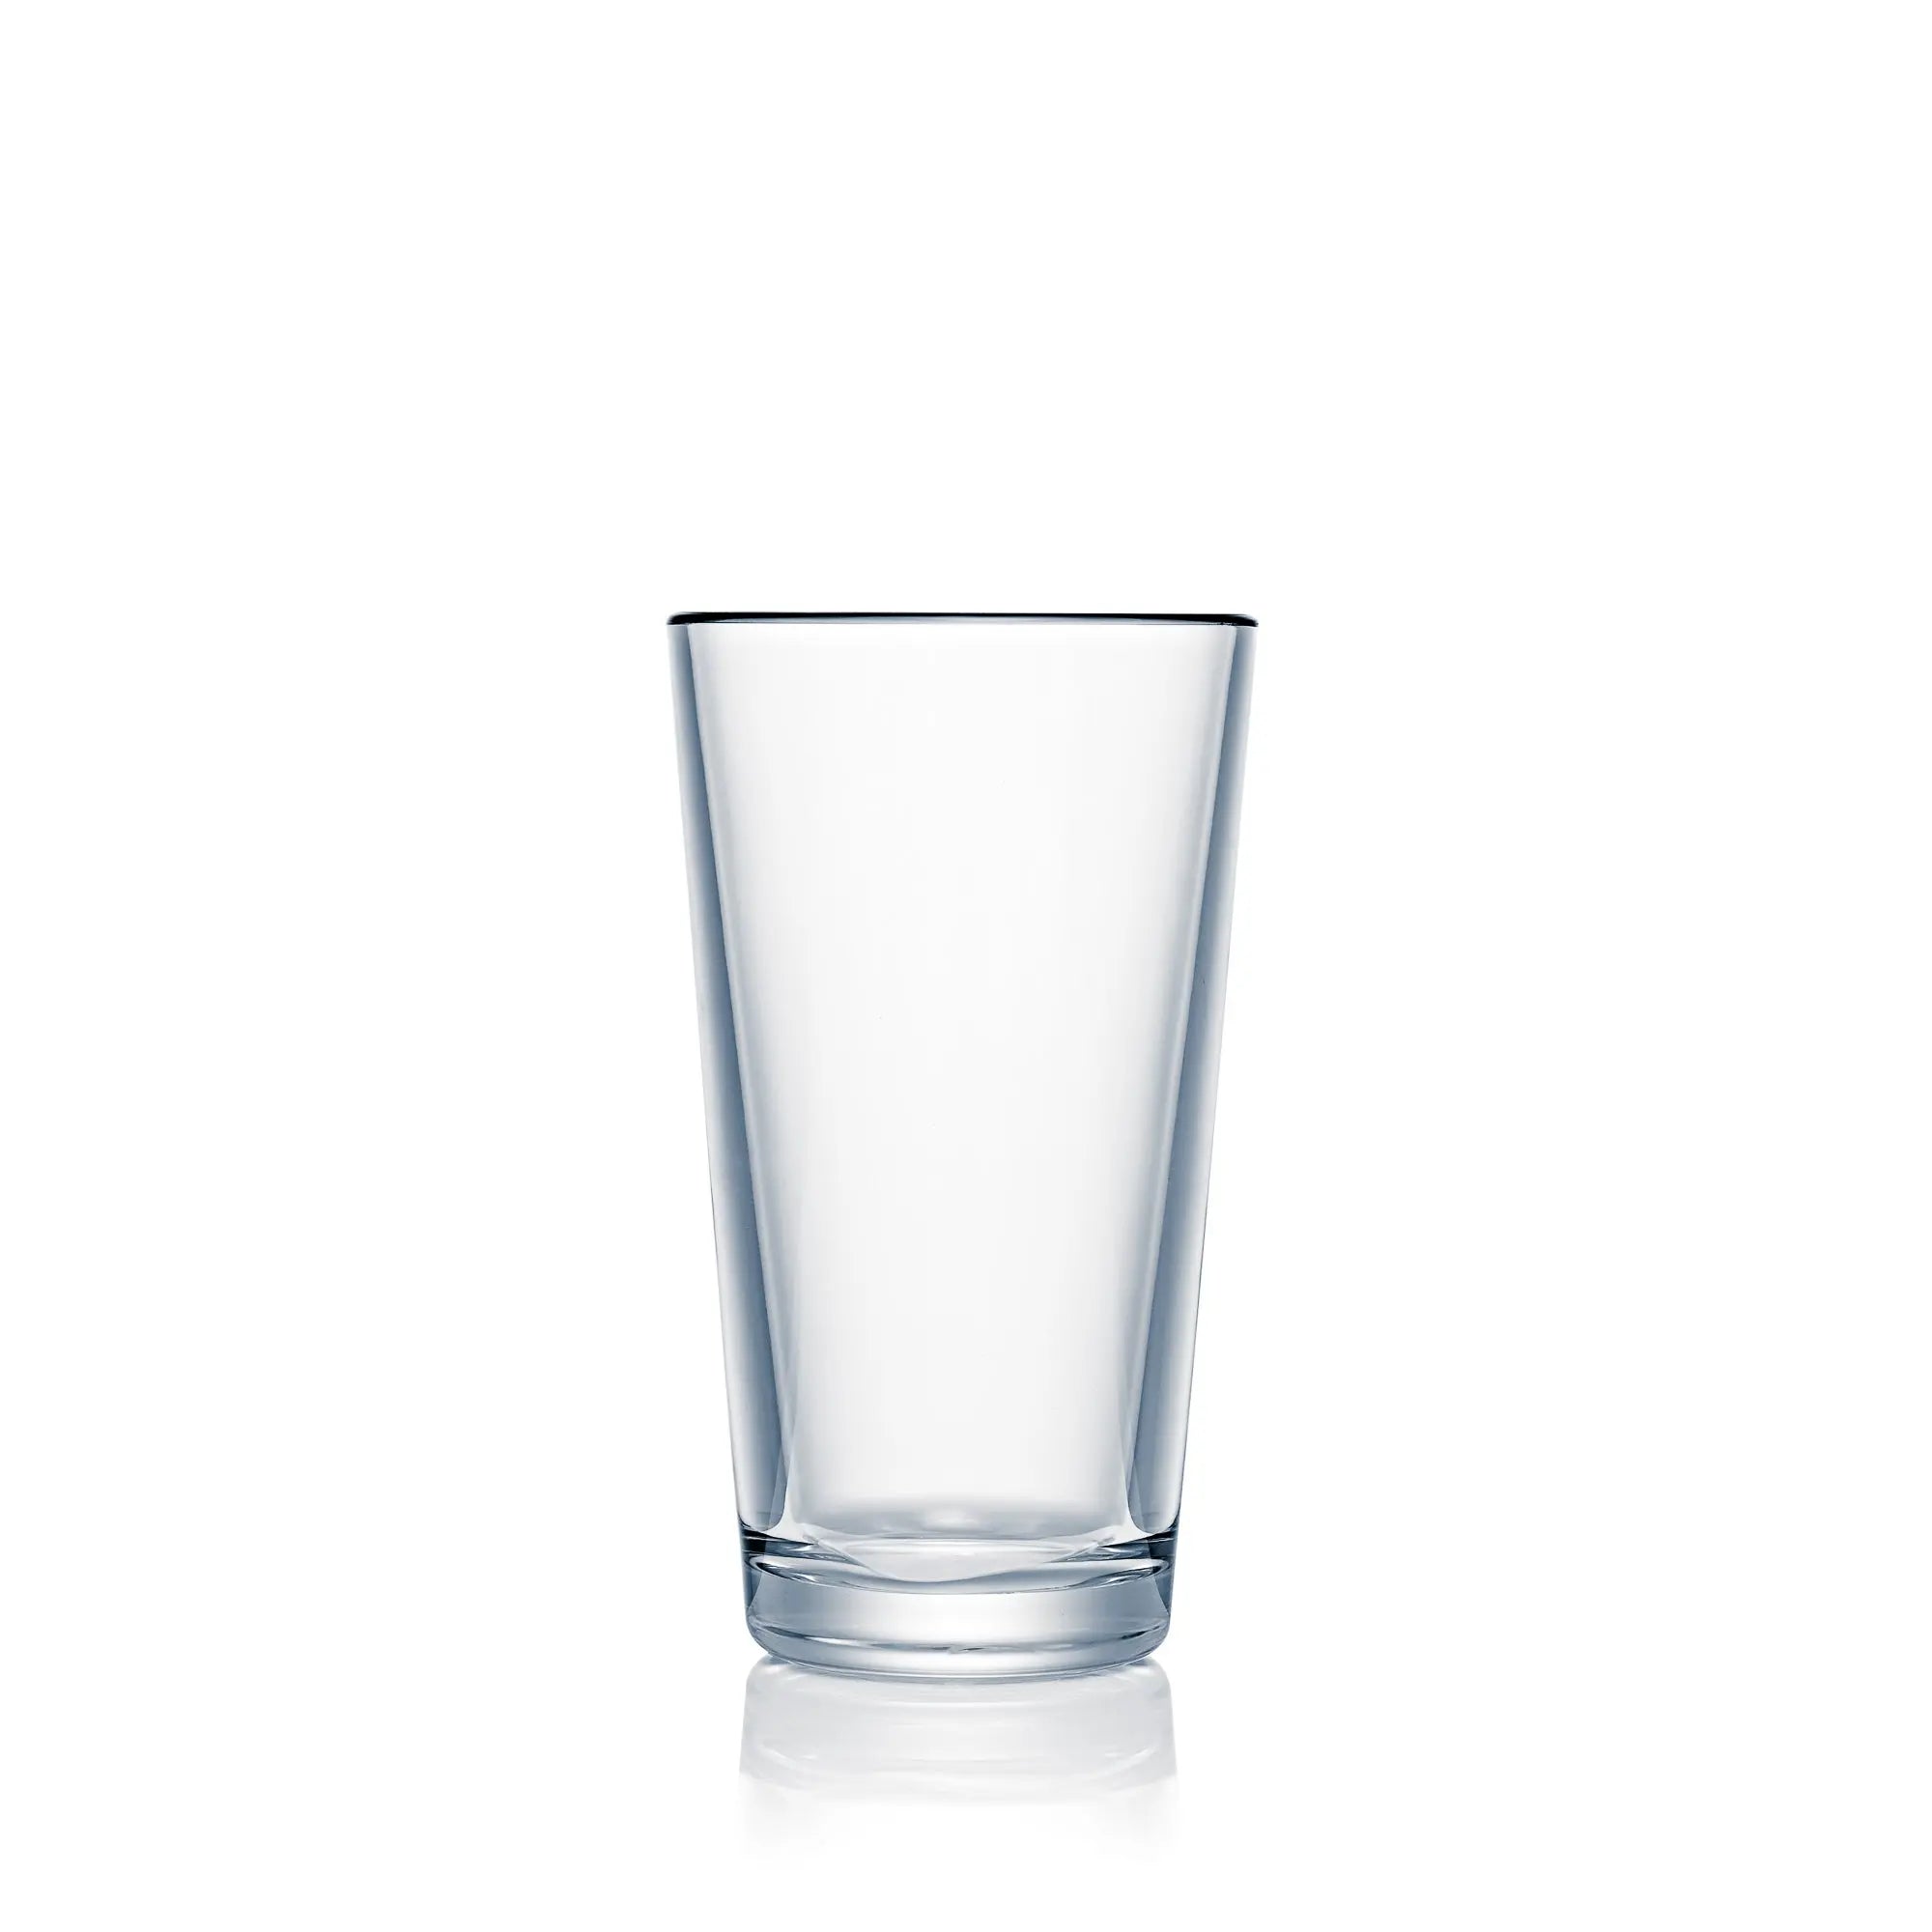 Strahl Design+Contemporary Mixing Glass (473ml) - N40380 Strahl